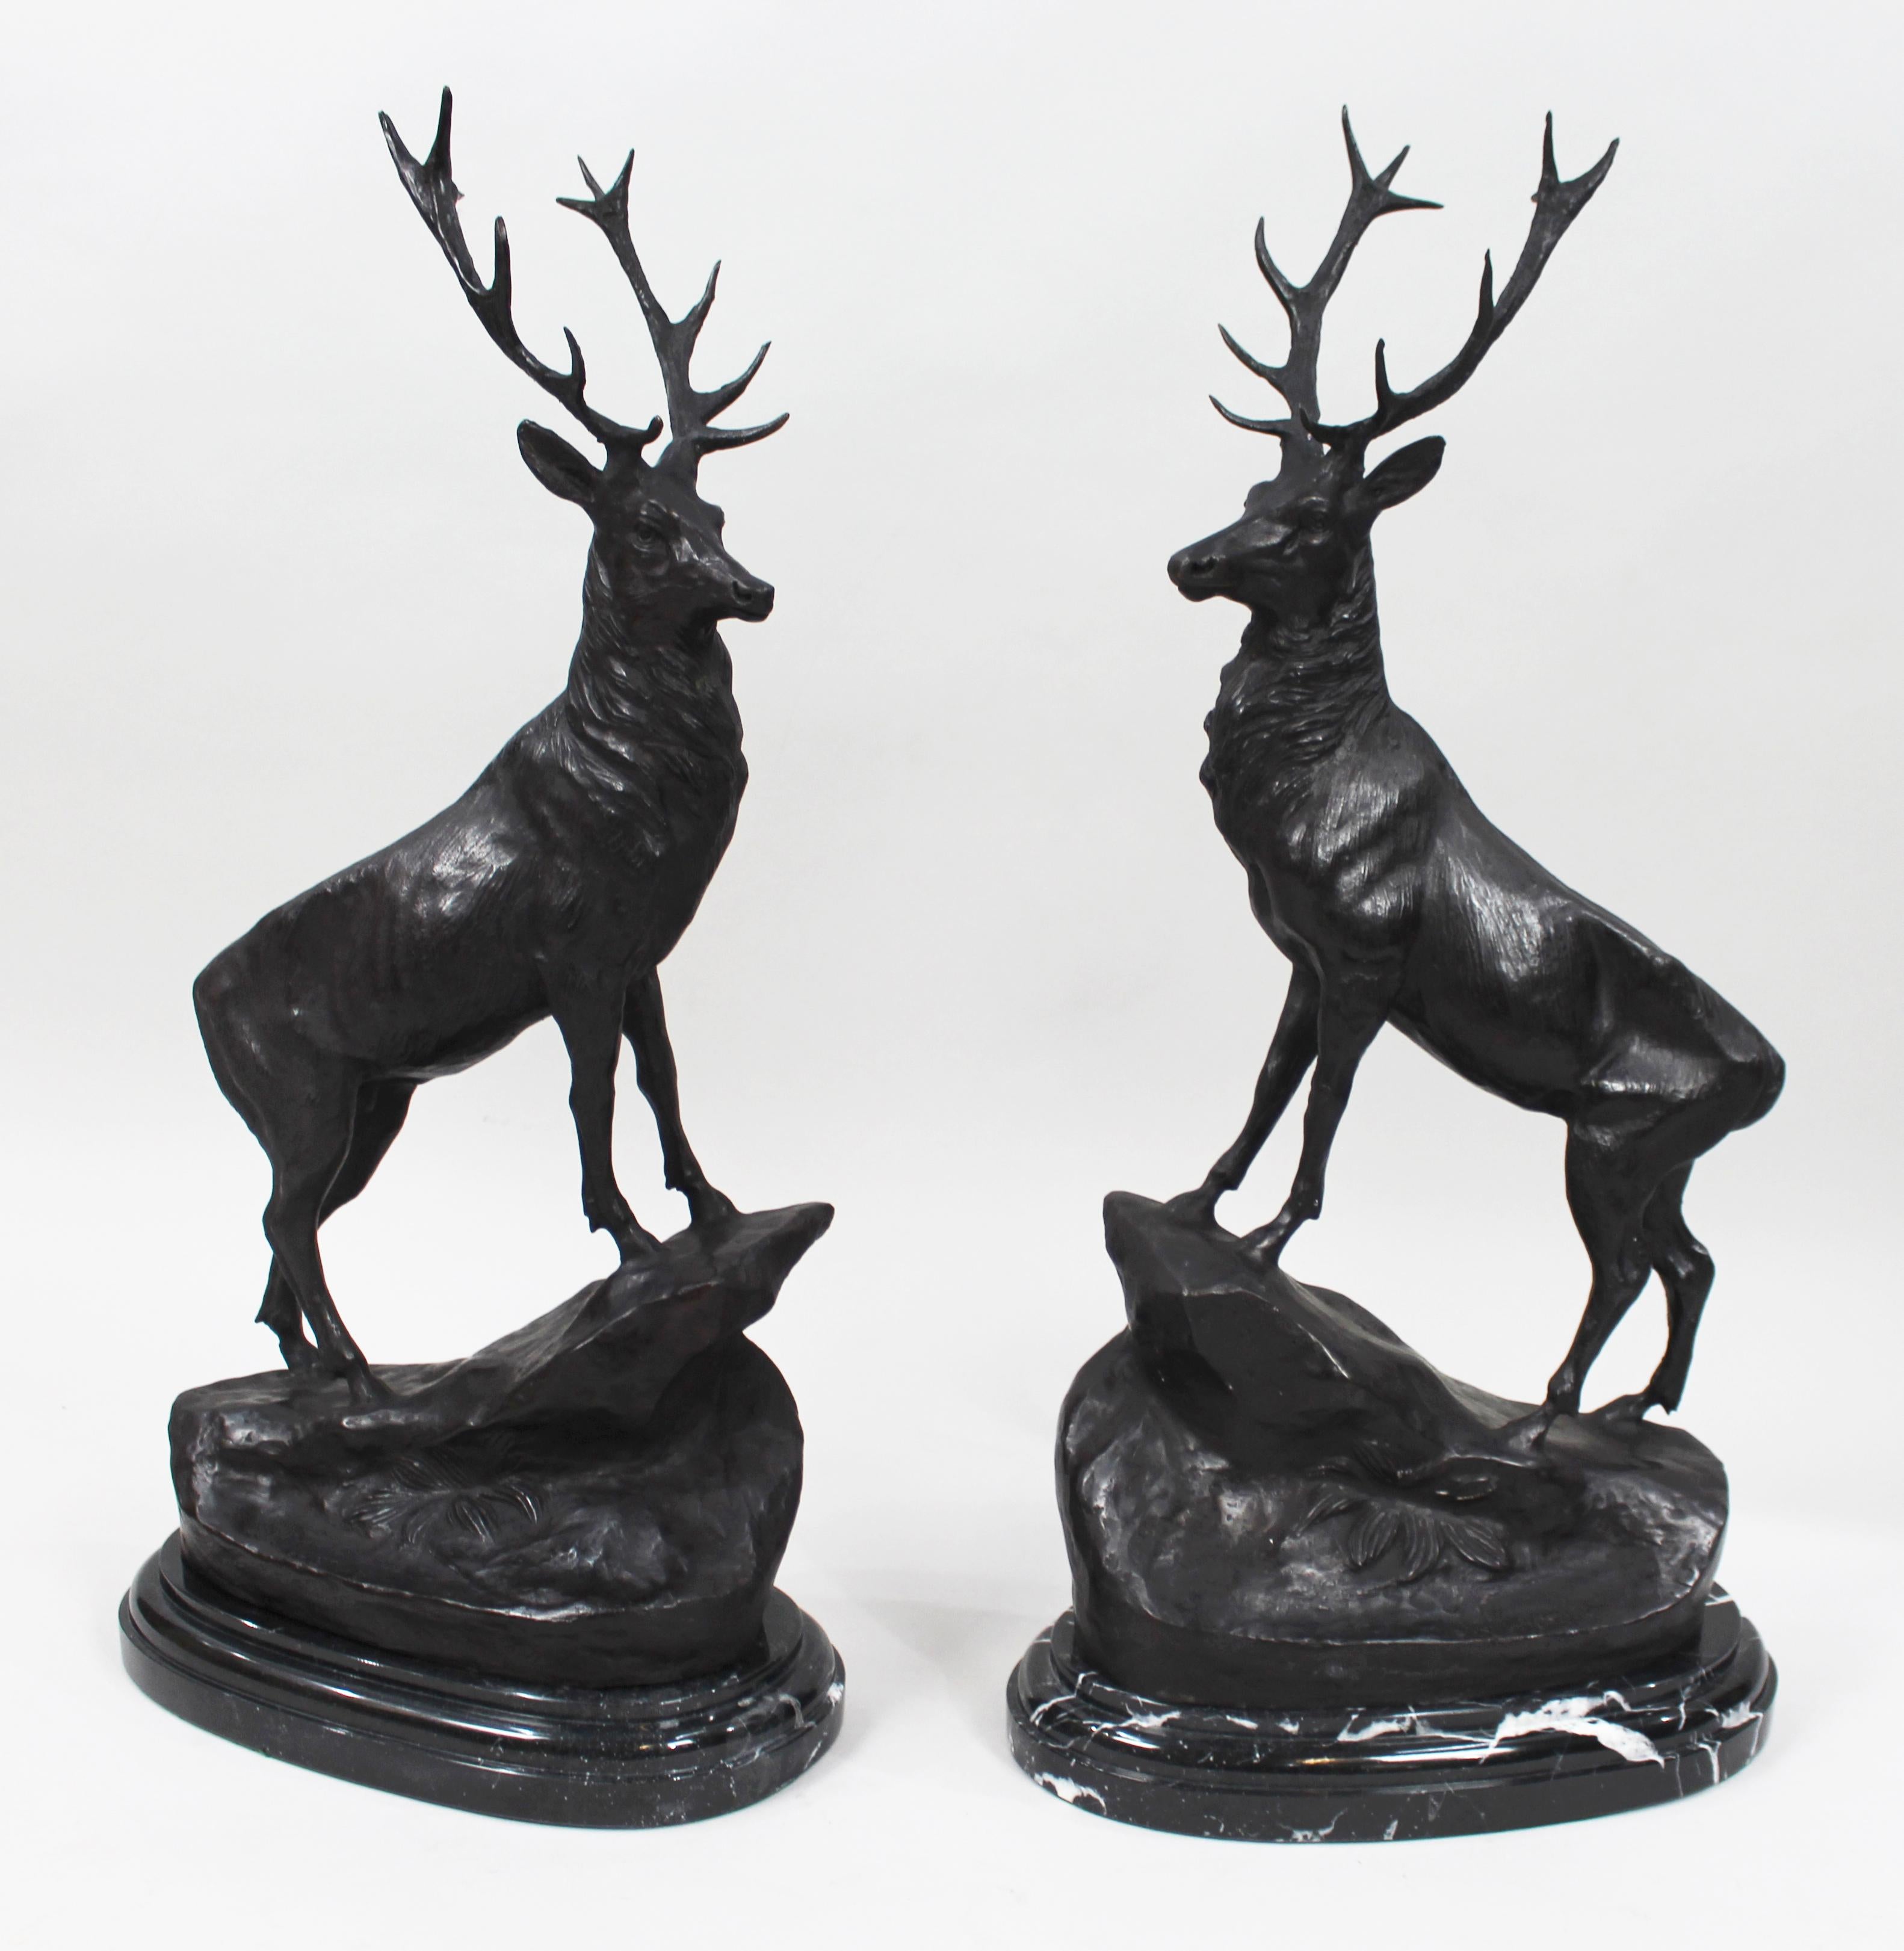 Pair of Large Bronze Stags on Marble after Jules Moigniez


Offered for sale a handsome pair of bronze stags, bearing the signature of 19th century French Animalier sculptor Jules Moigniez, from the last quarter of the 20th century.

The stags